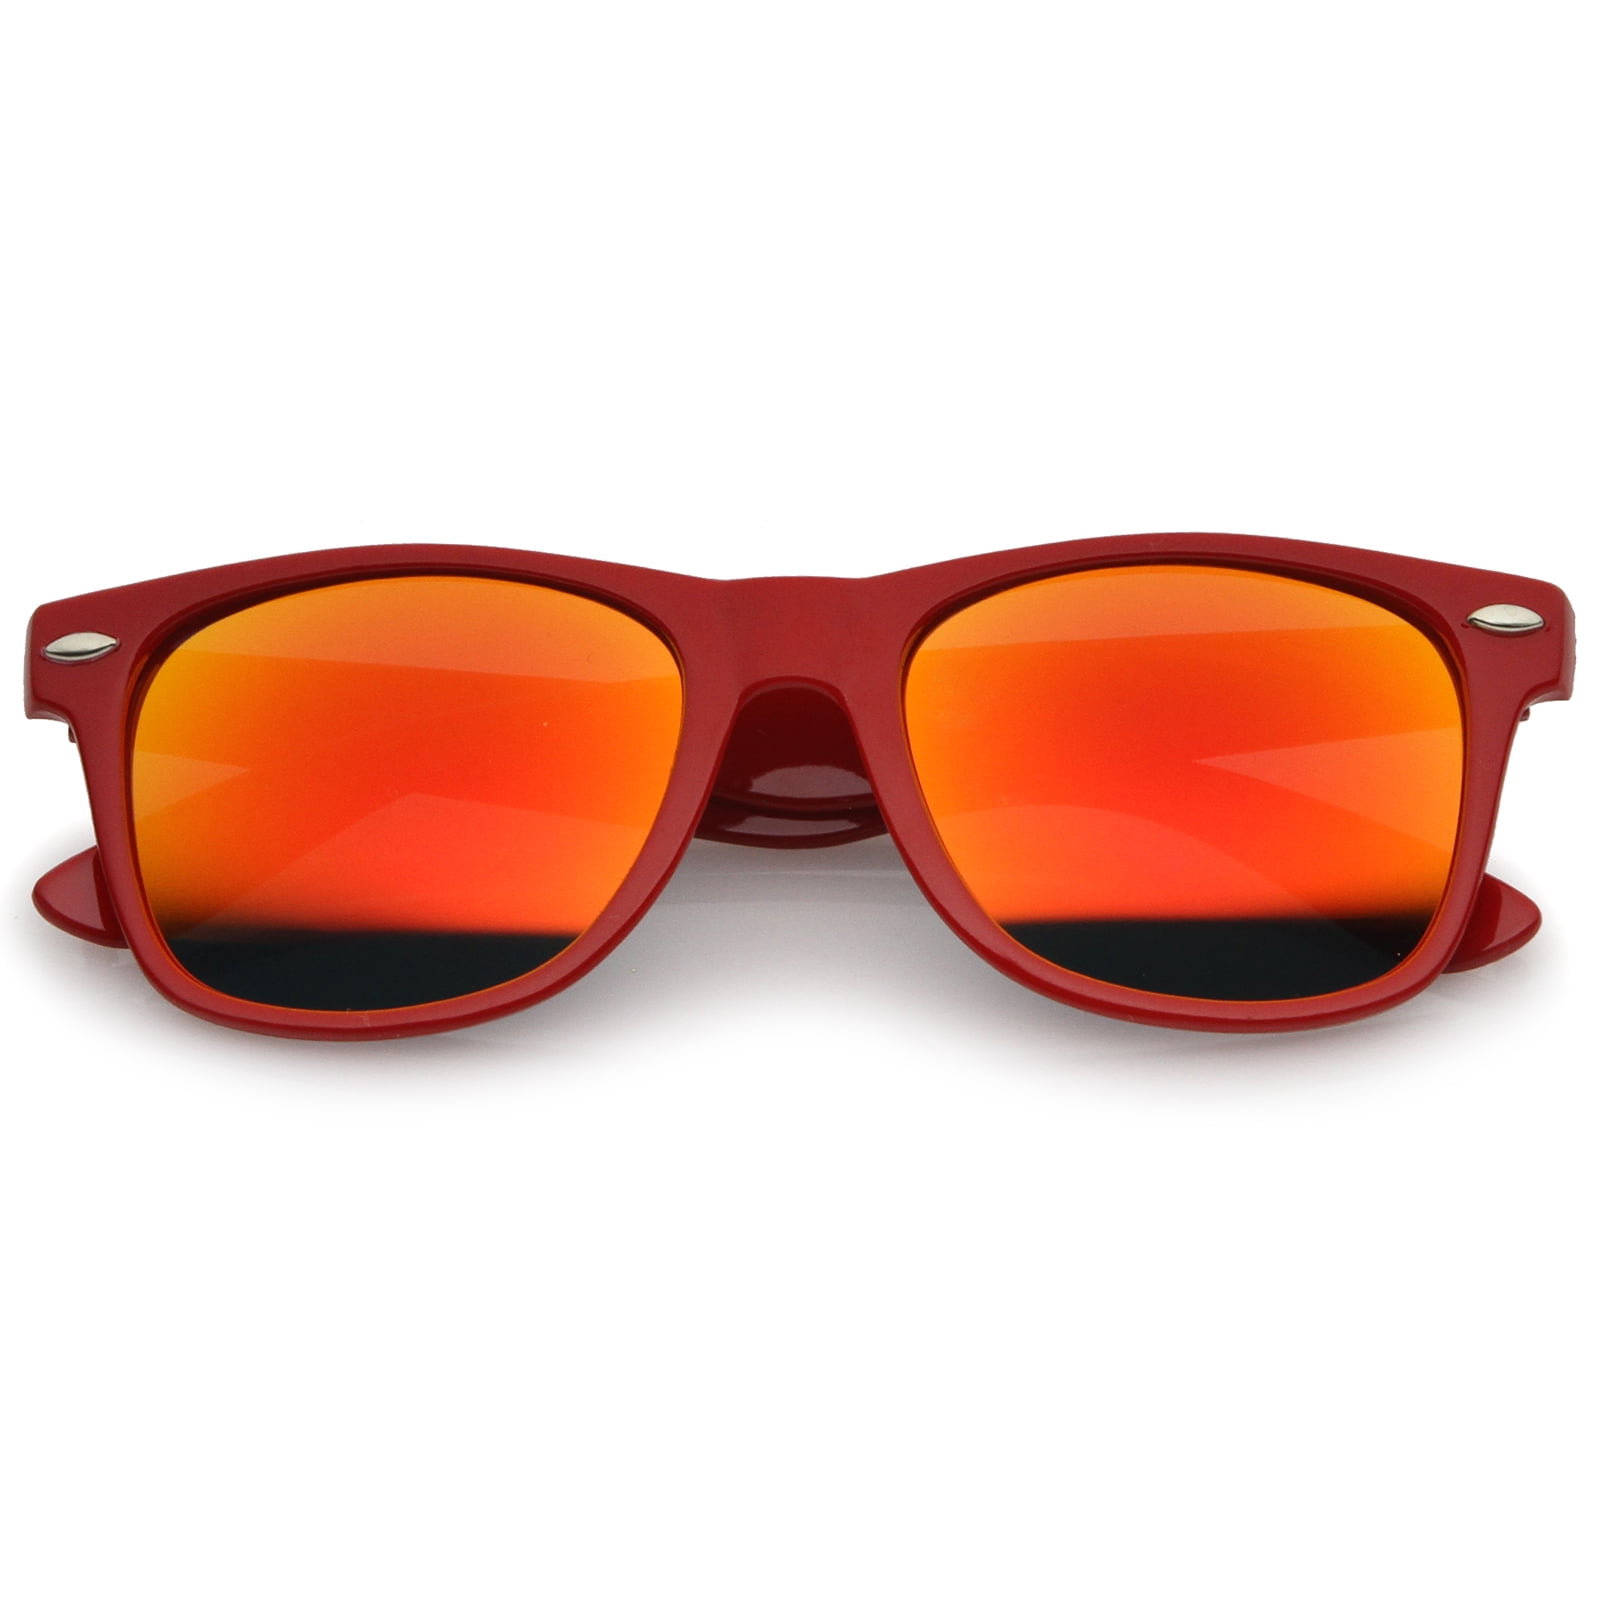 Retro Large Square Colored Mirror Lens Horn Rimmed Sunglasses 55mm Red Red Orange Mirror